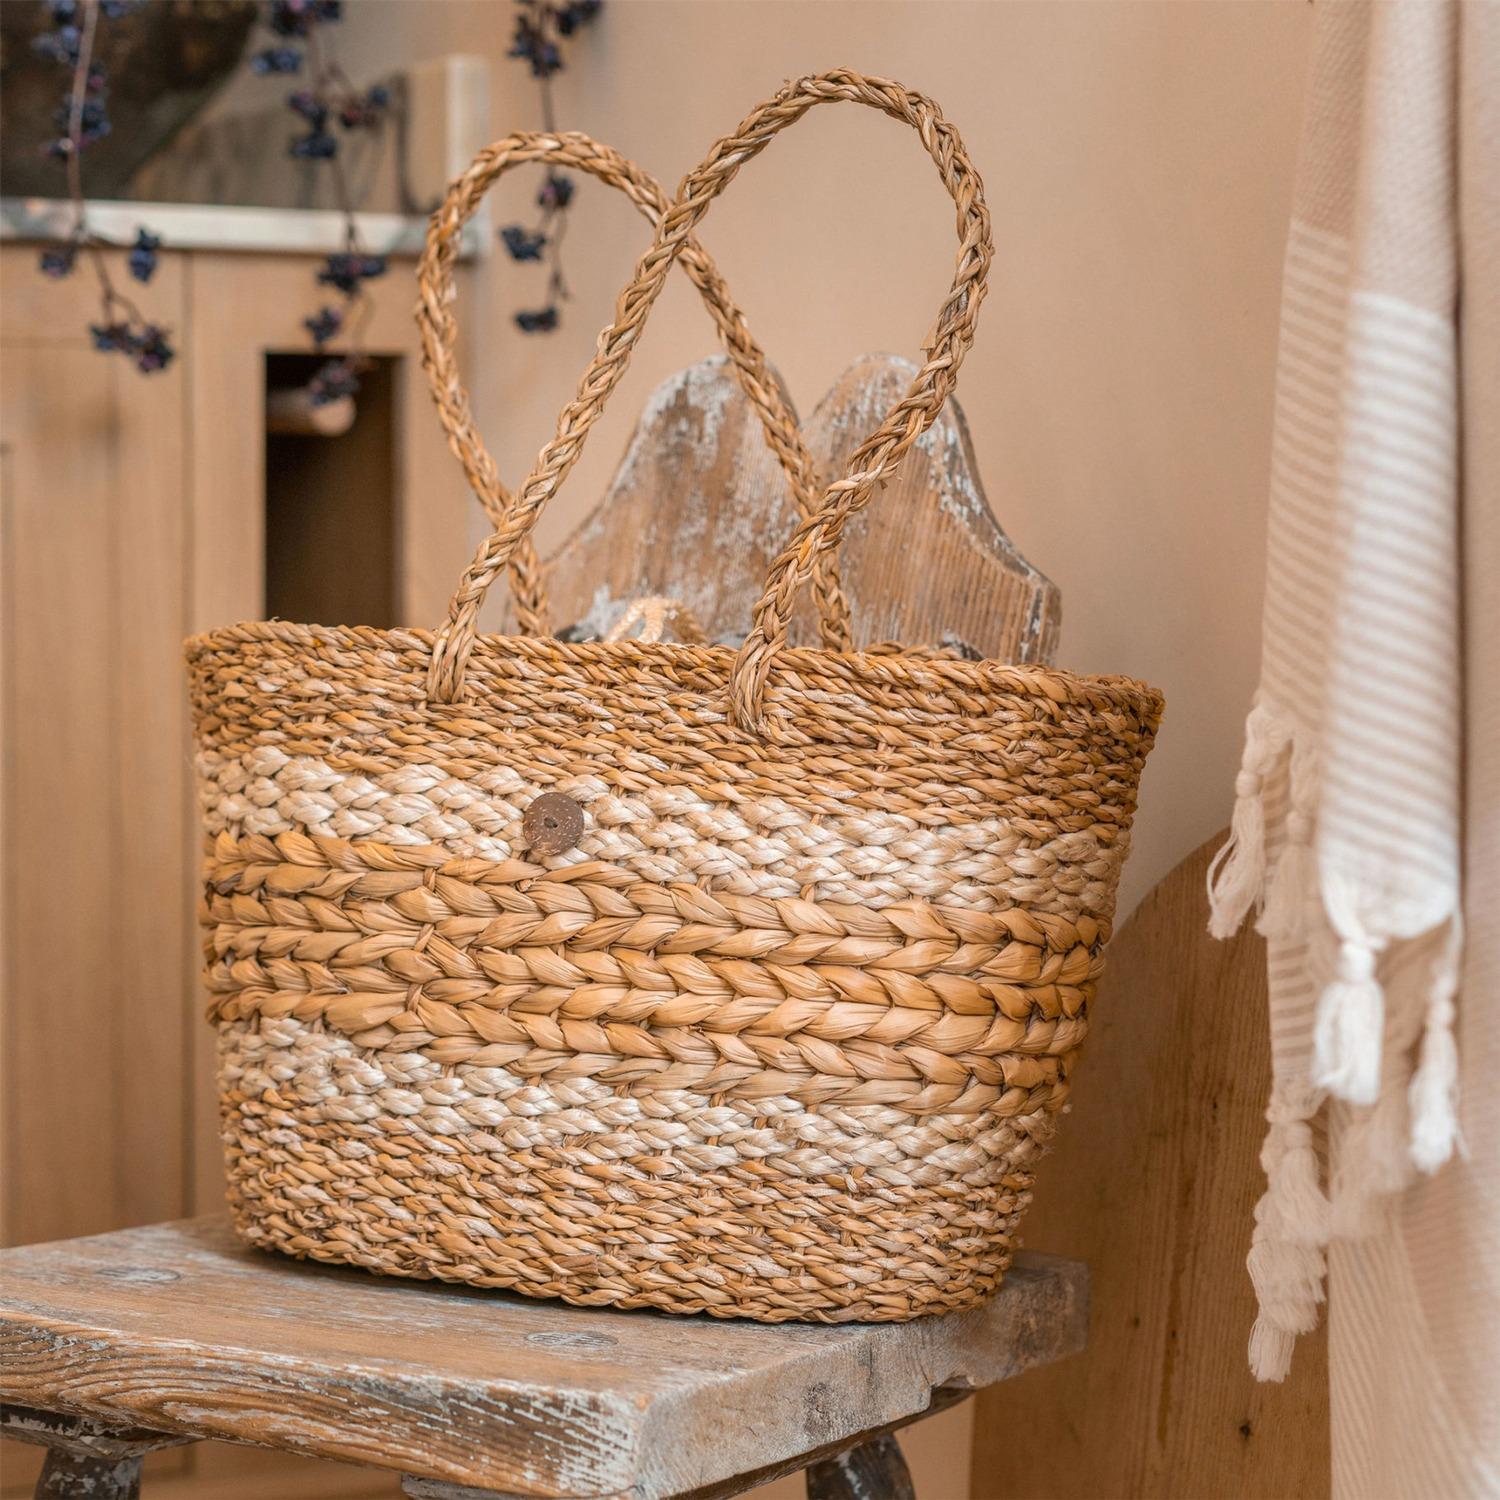 Stripped seagrass basket by turtle bags